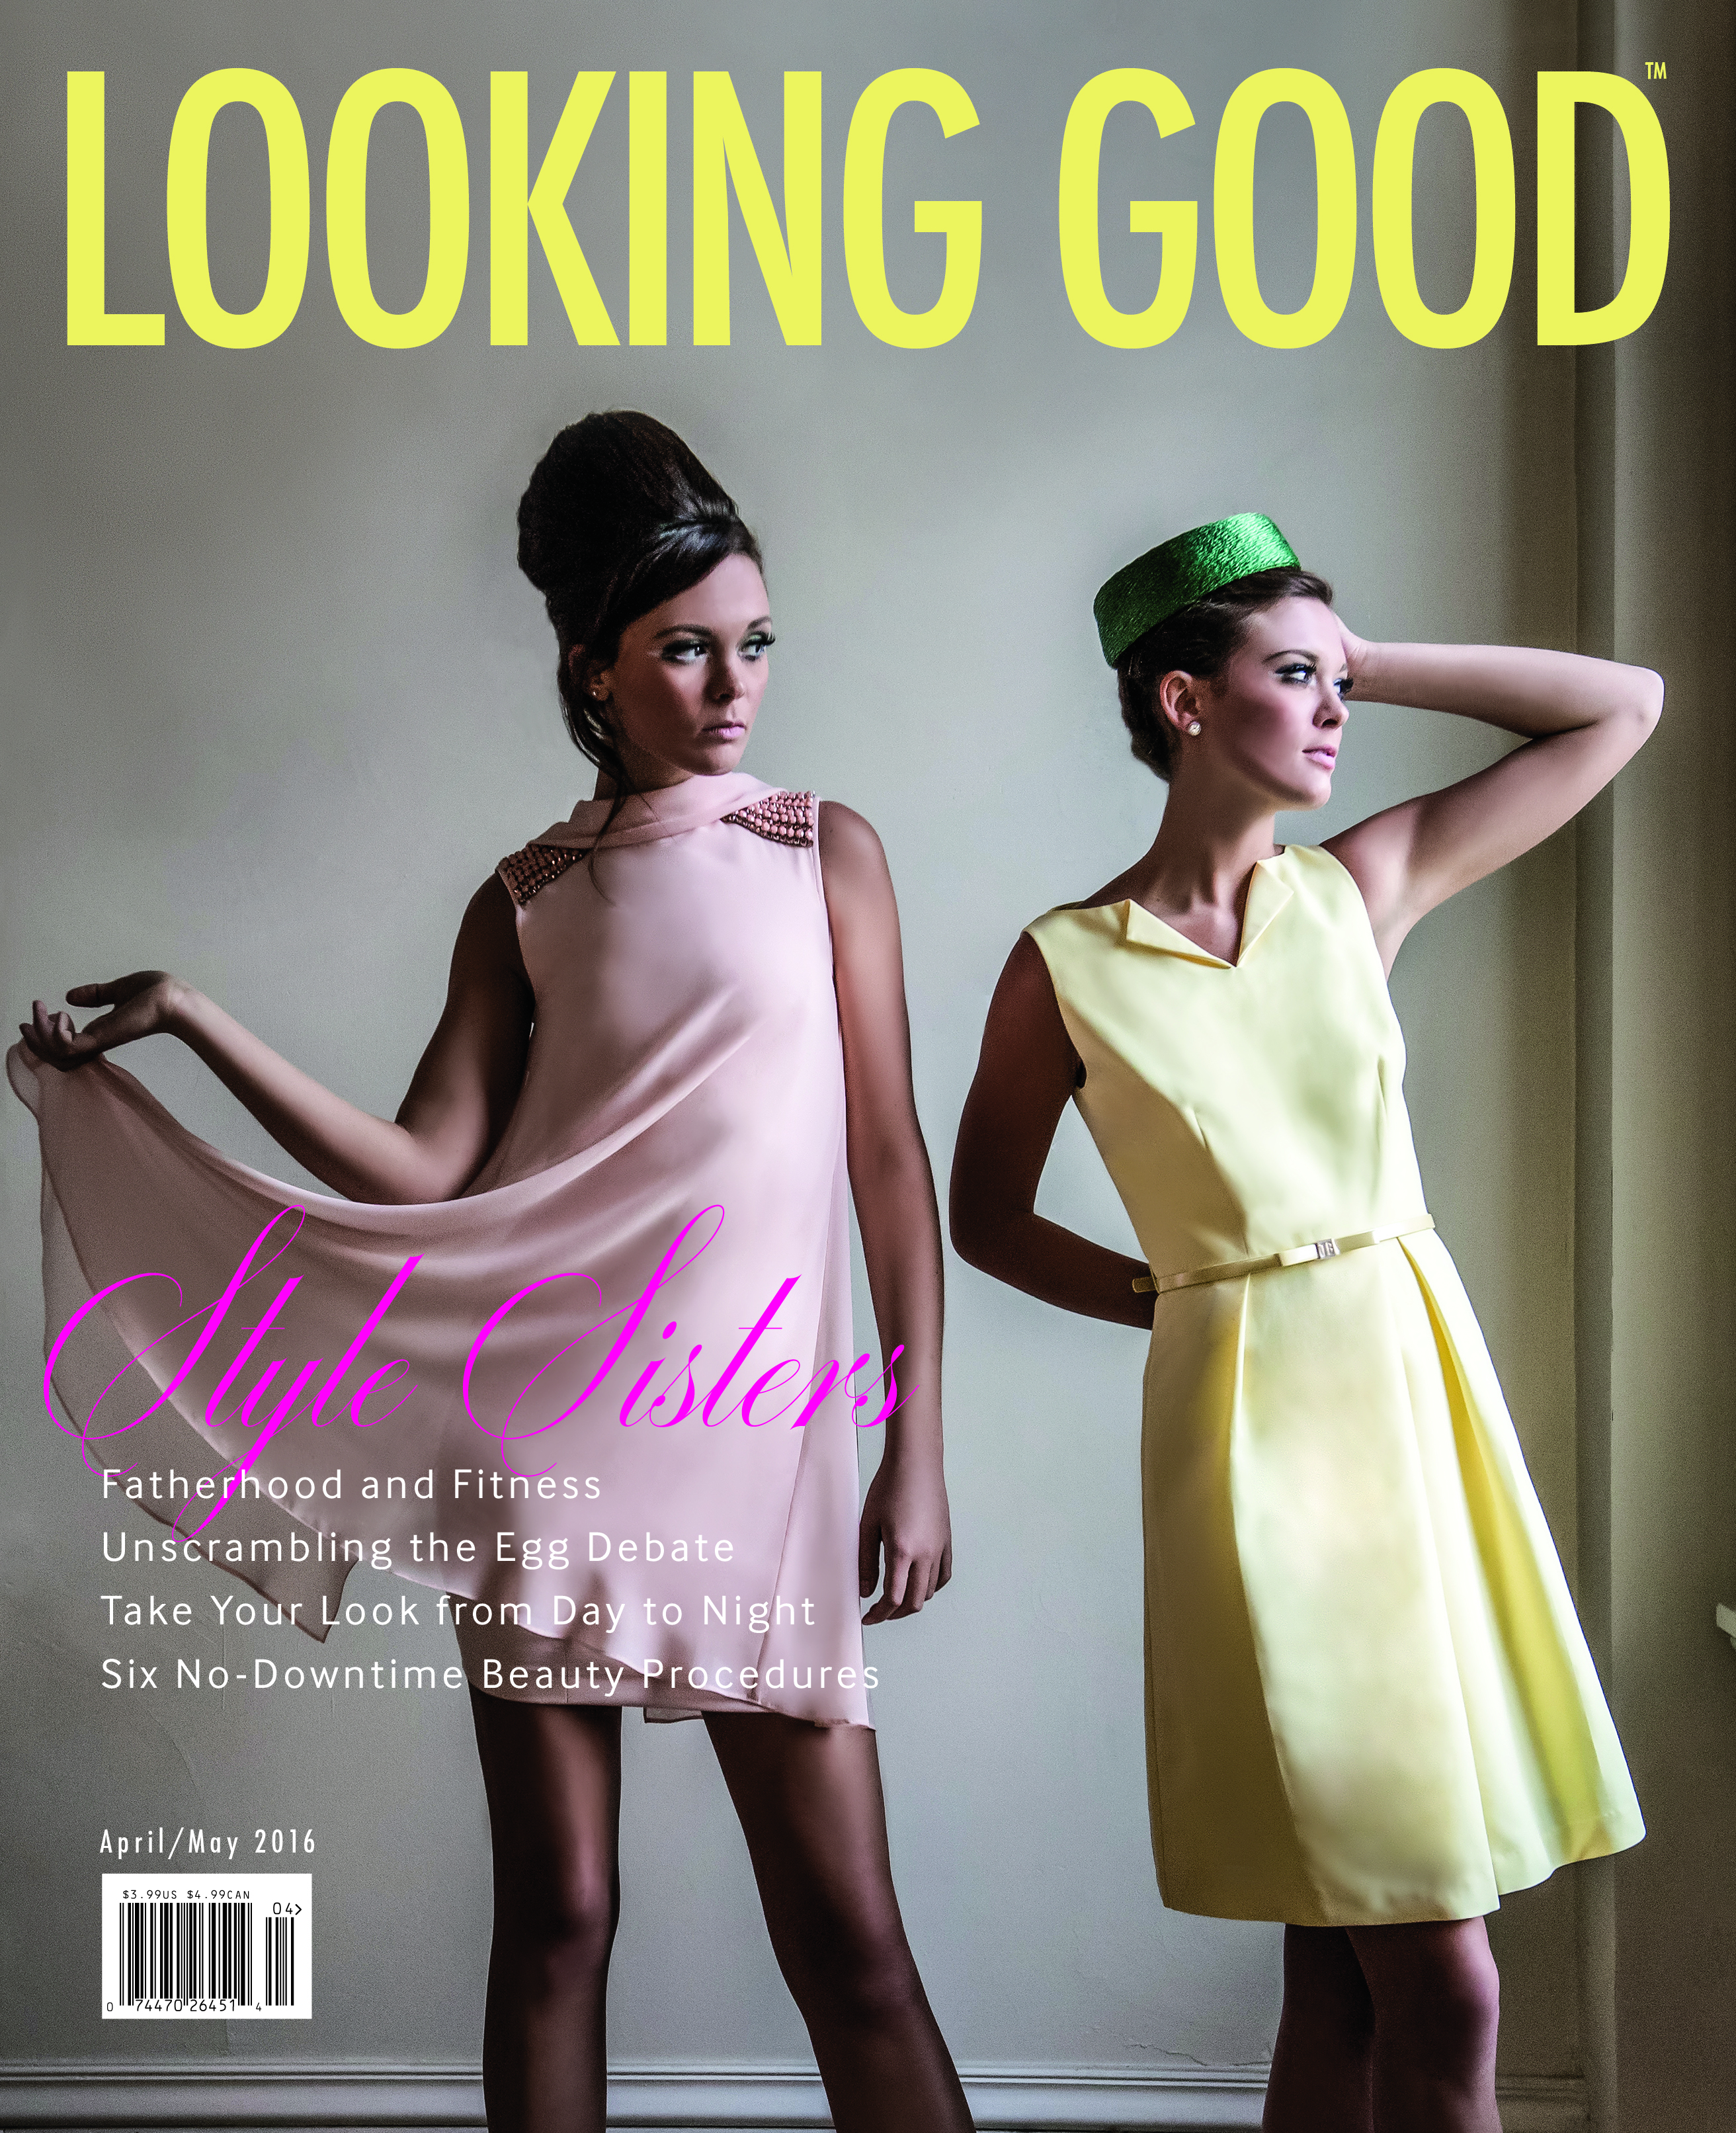 Looking Good - "Style Sisters," April/May